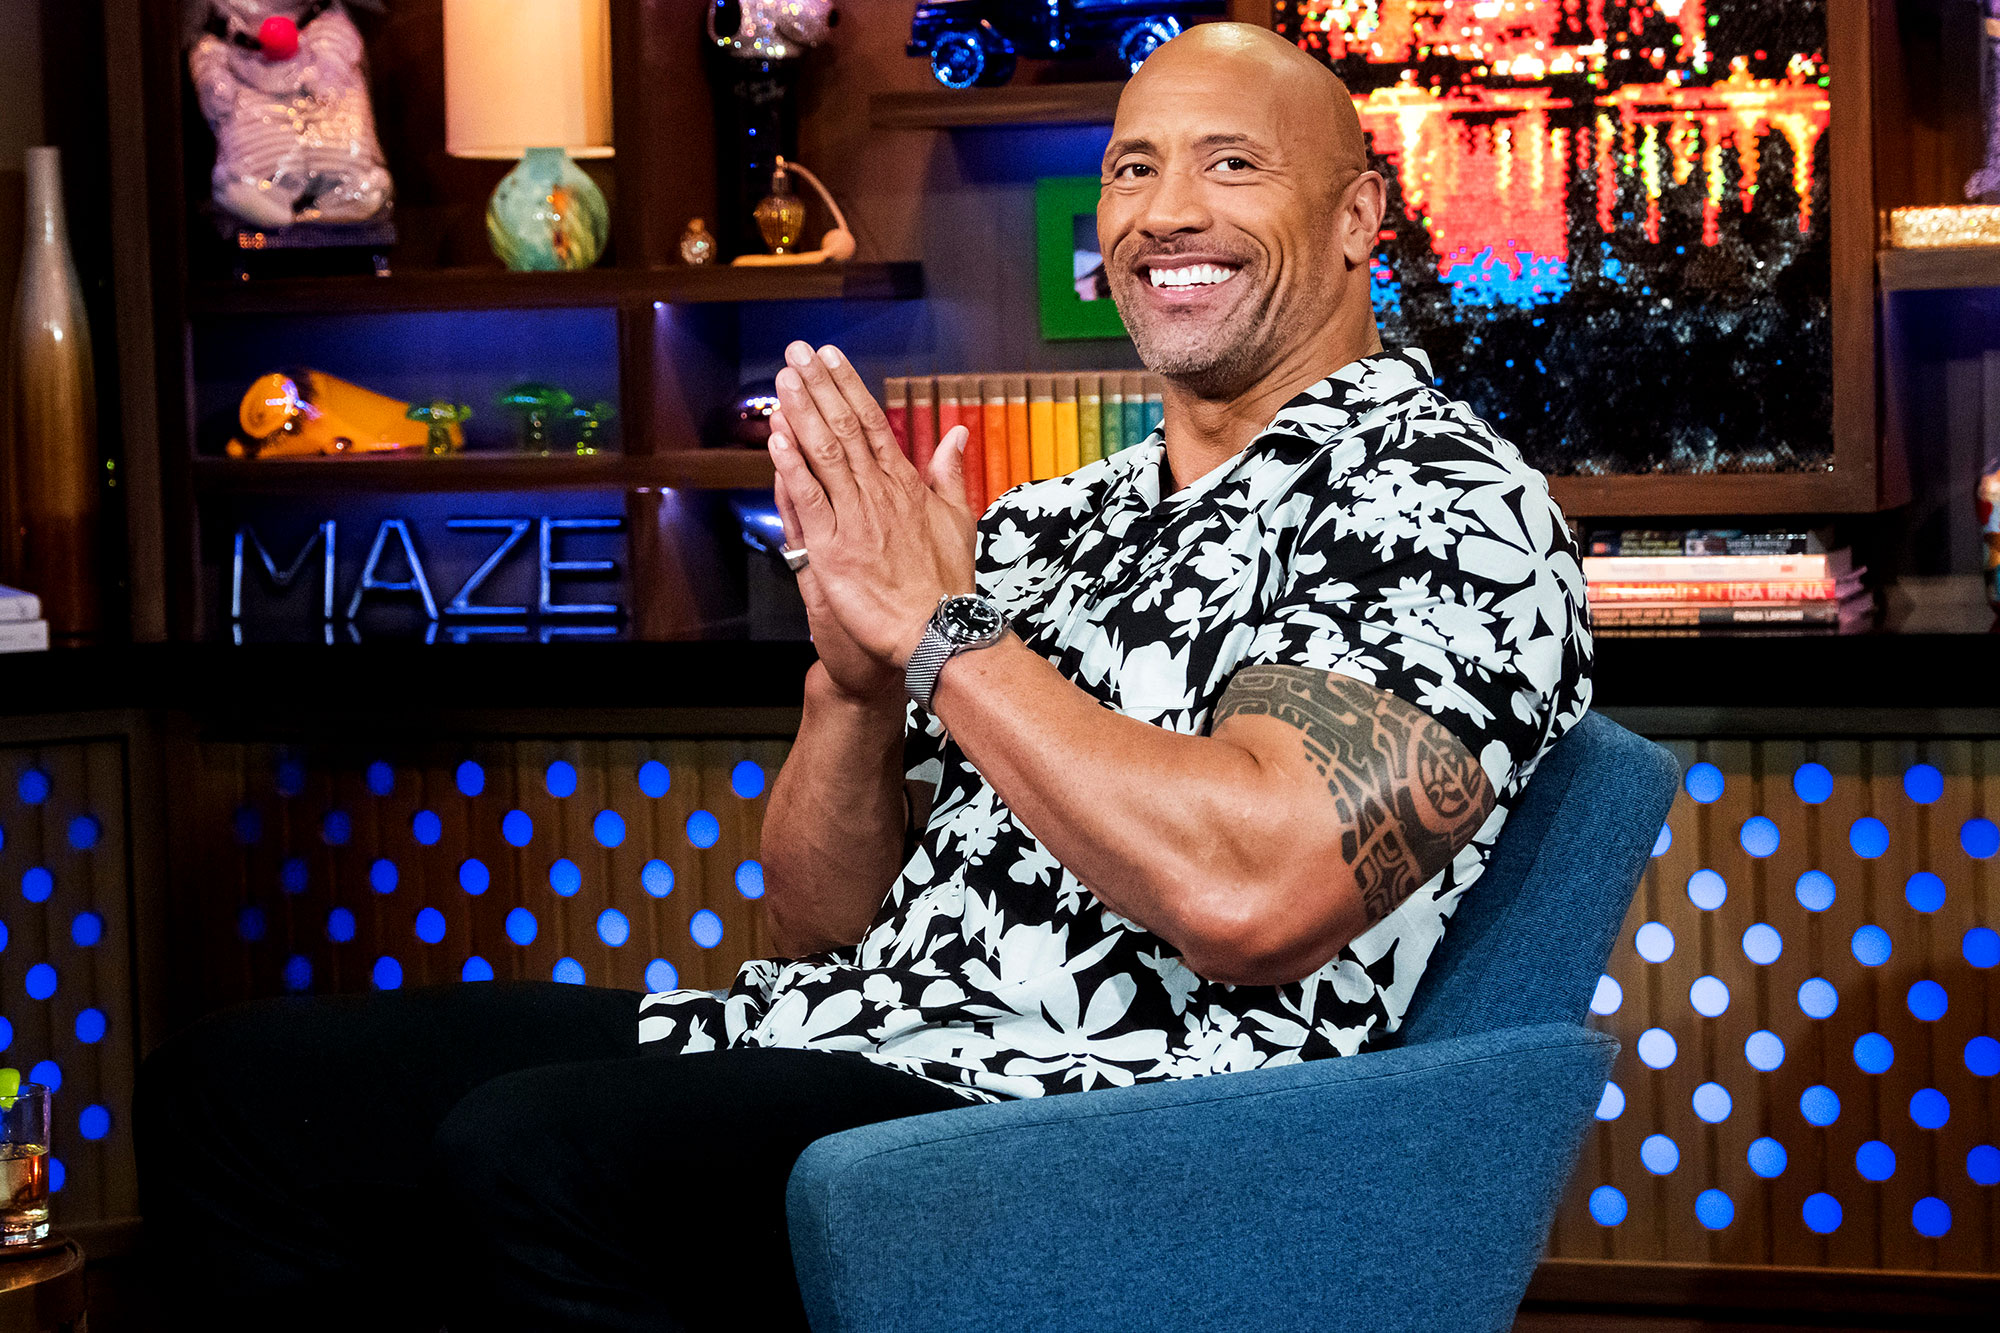 Dwayne 'The Rock' Johnson workout, diet and his love for pizza